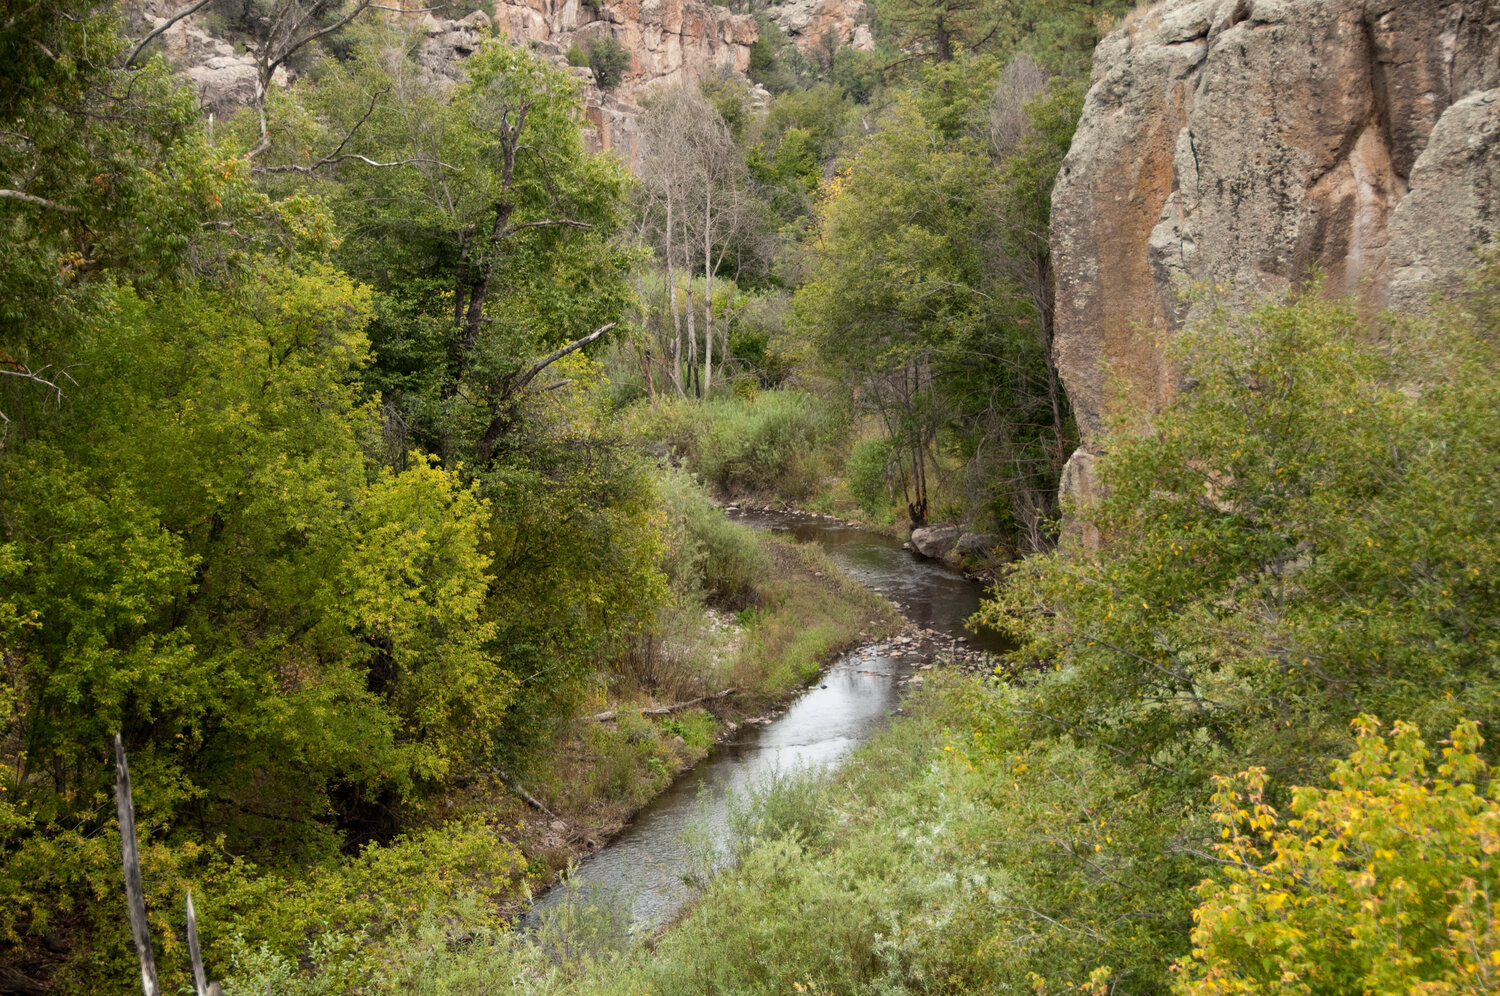 West Fork of the Gila River, Gila Wilderness Area.